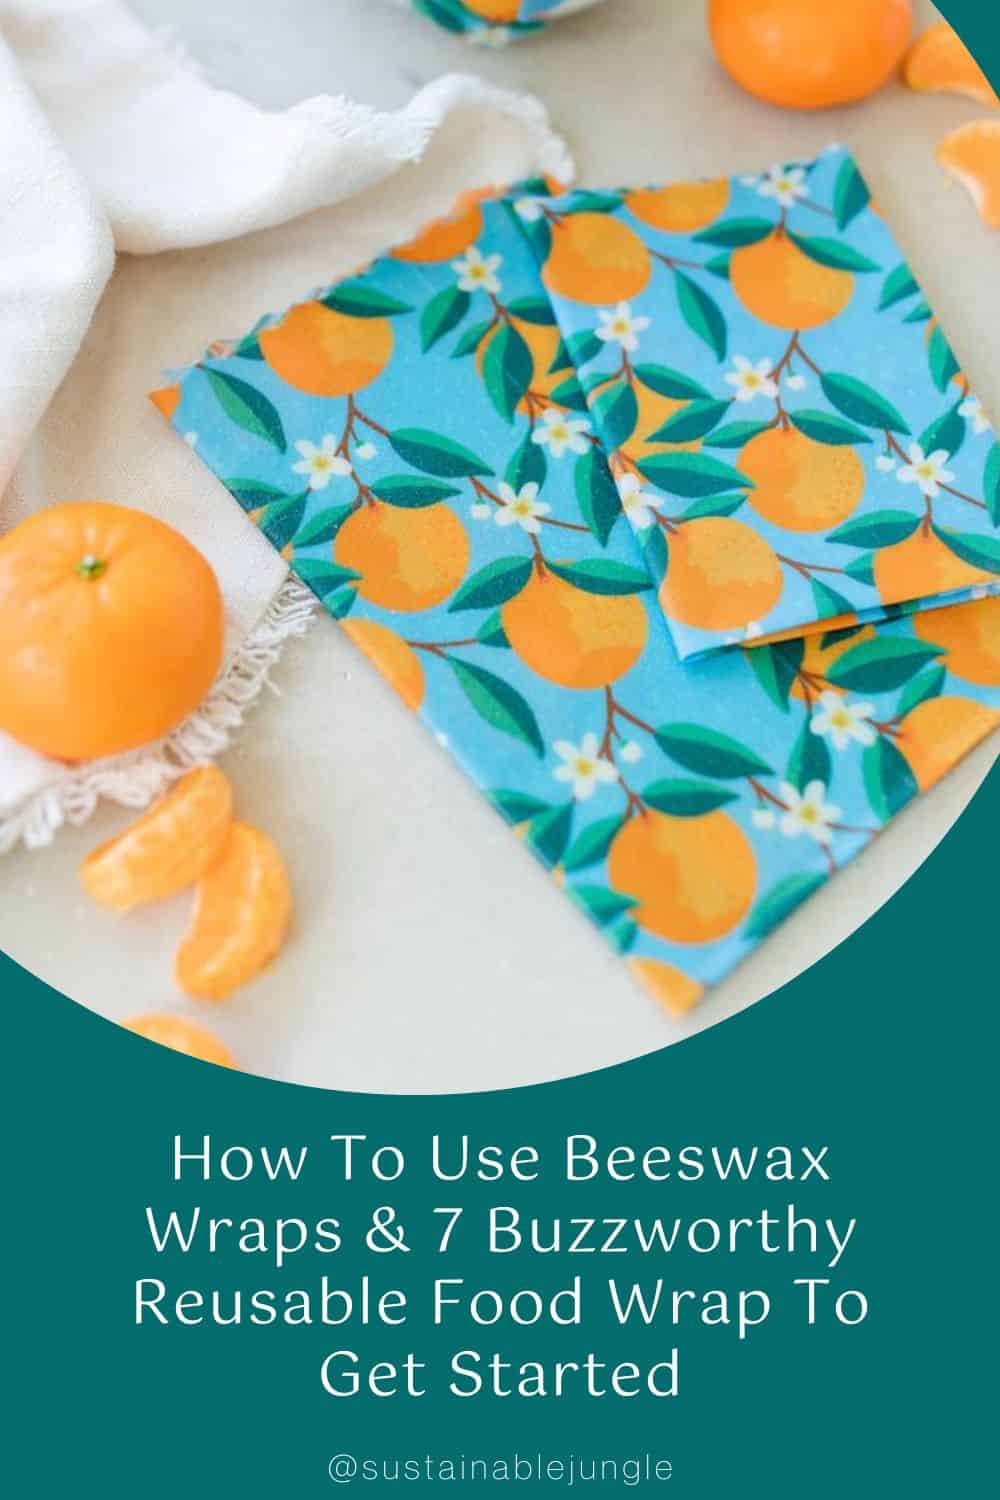 How To Use Beeswax Wraps & 7 Buzzworthy Reusable Food Wrap To Get Started Image by Nothing Fancy Supply #howtousebeeswaxwraps #howtousebeeswaxfoodwraps #reusablefoodwraps #bestreusablefoodwraps #howtousebeeswrap #sustainablejungle